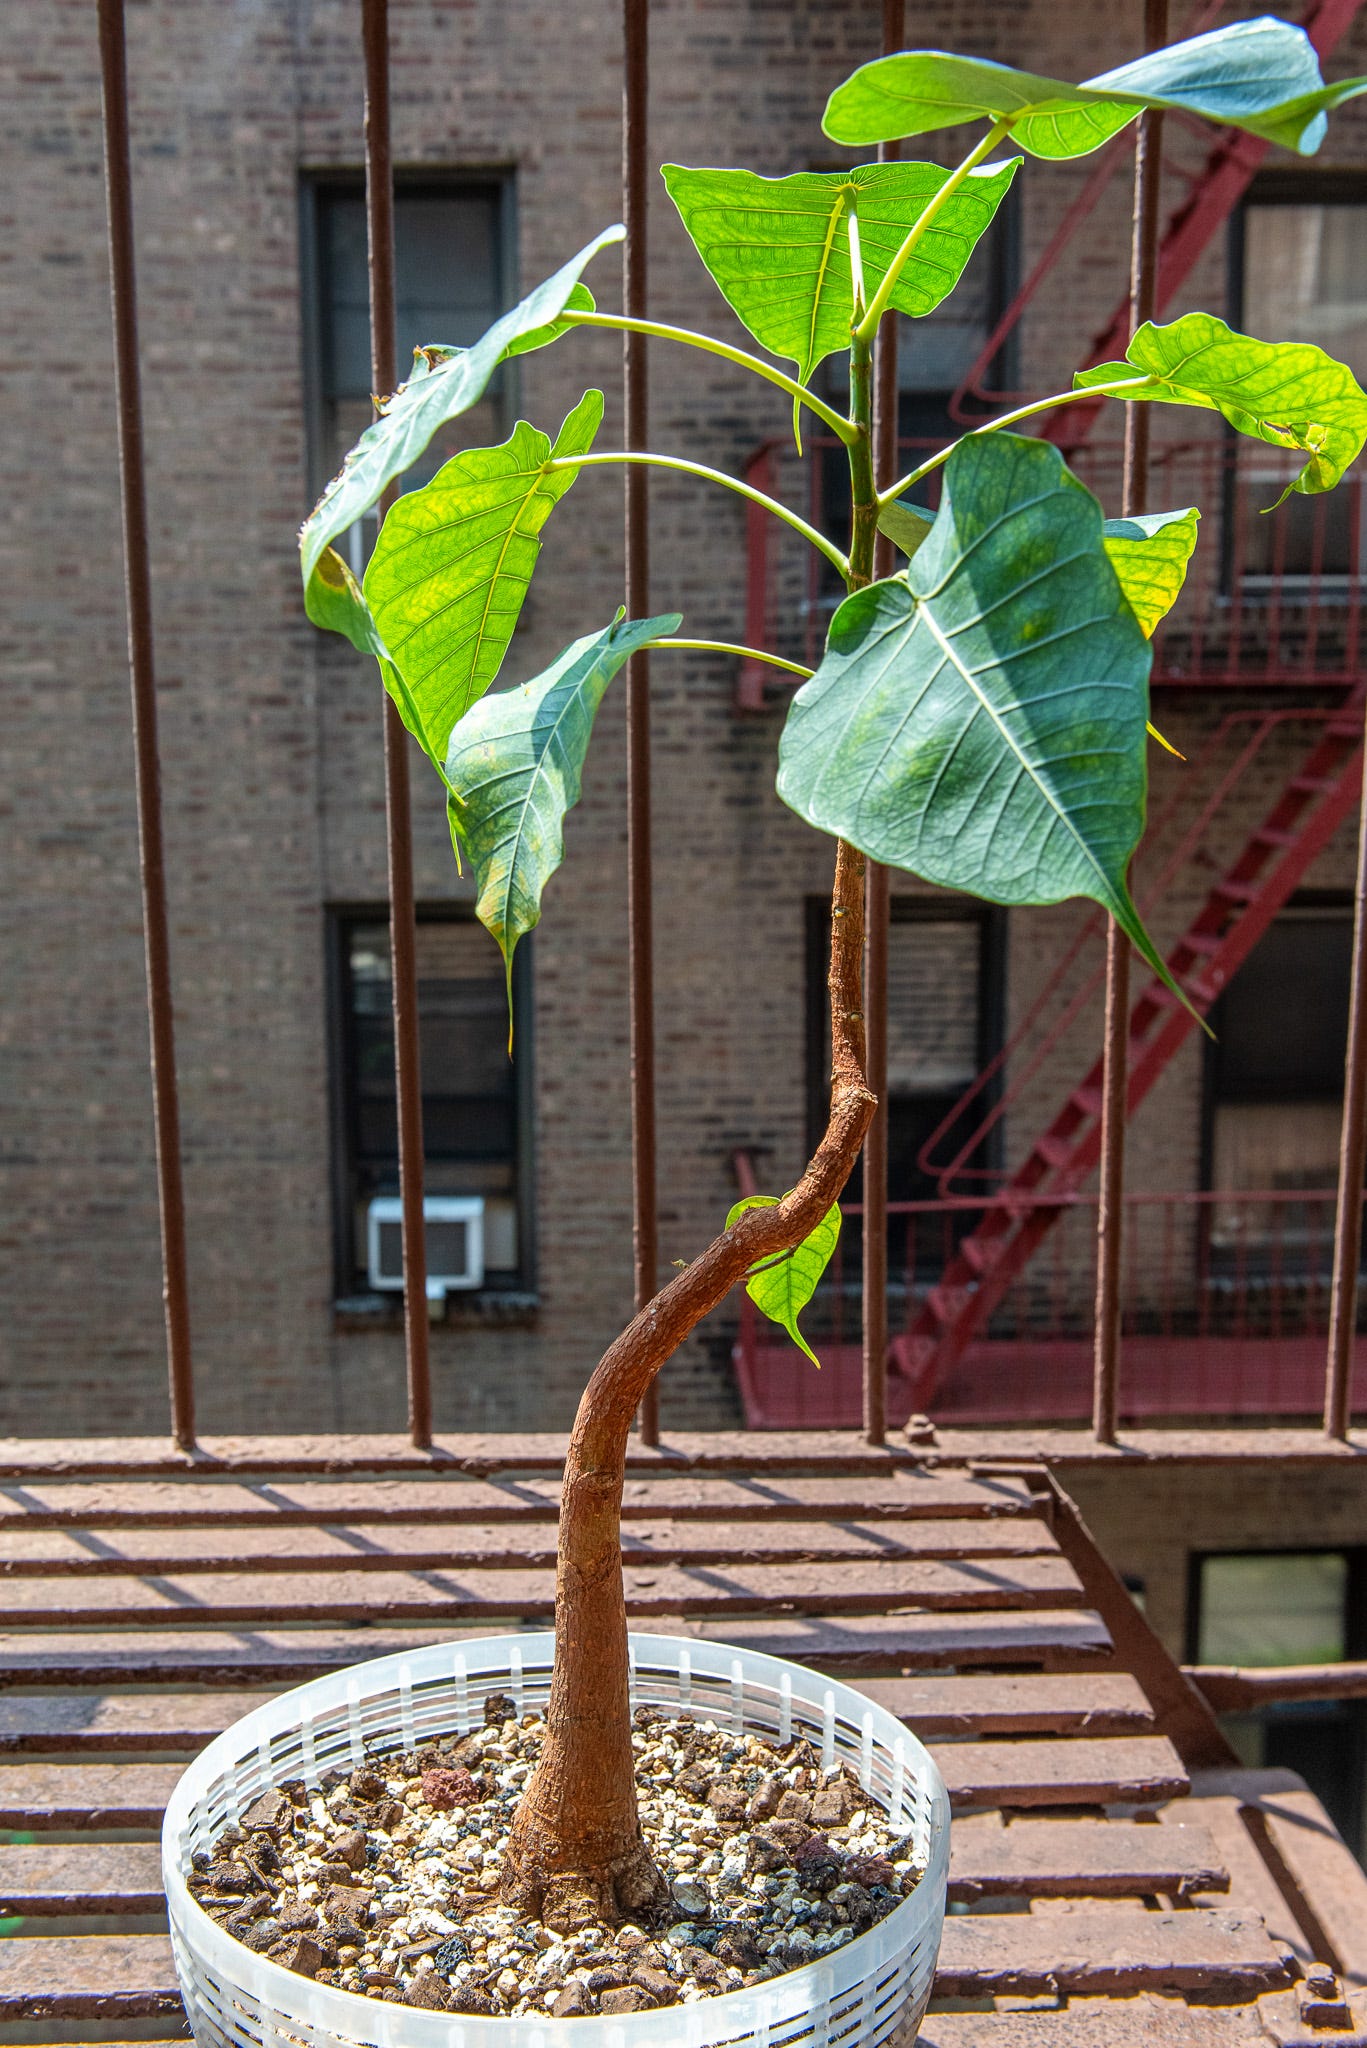 ID: Photo of Ficus religiosa bonsai planted in a colander on my fire escape, with a straight fluted trunk and a tuft of leaves at the top